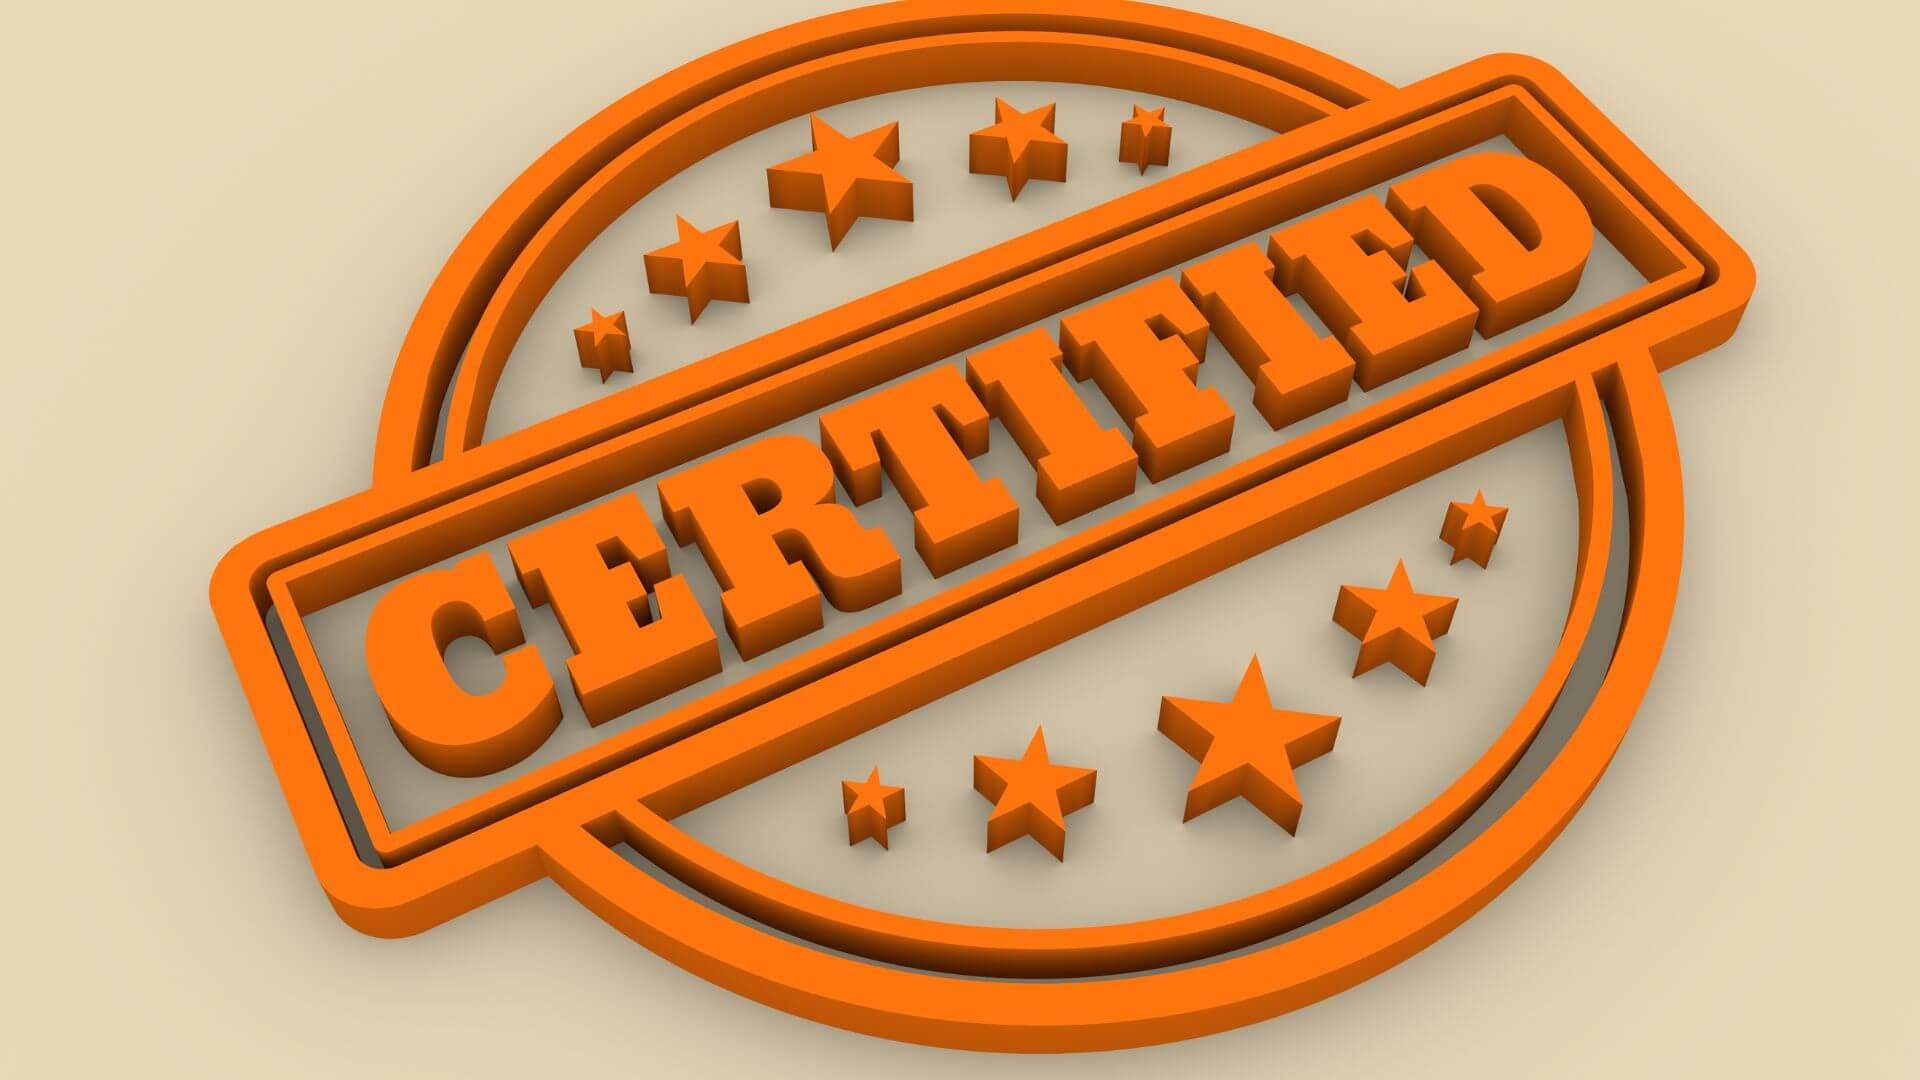 How to Become Microsoft Certified in a Short Time?